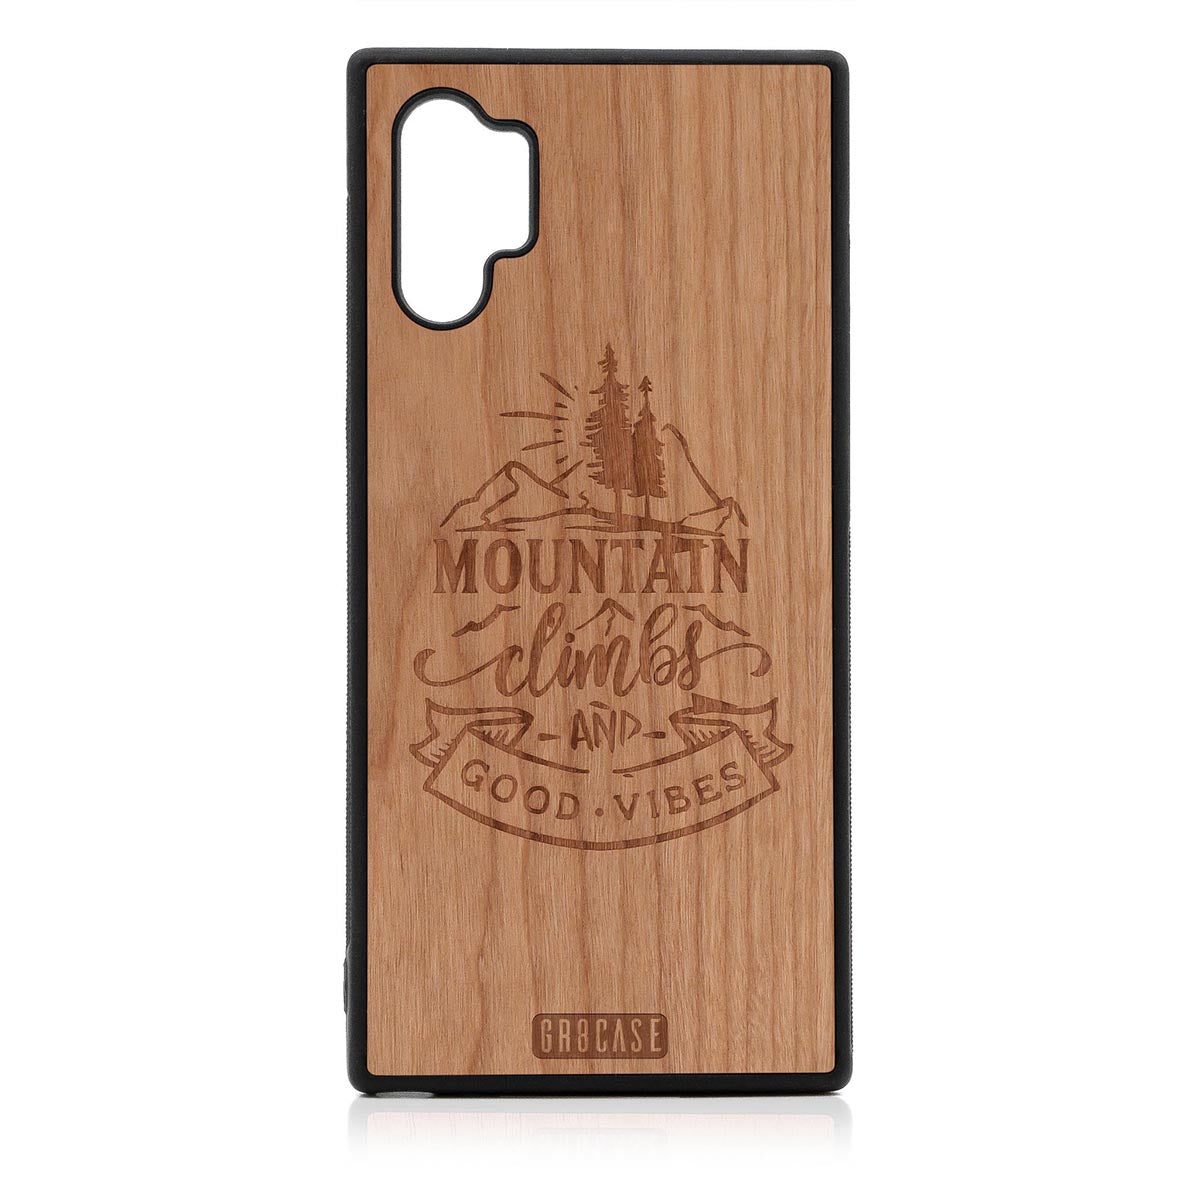 Mountain Climbs And Good Vibes Design Wood Case Samsung Galaxy Note 10 Plus by GR8CASE